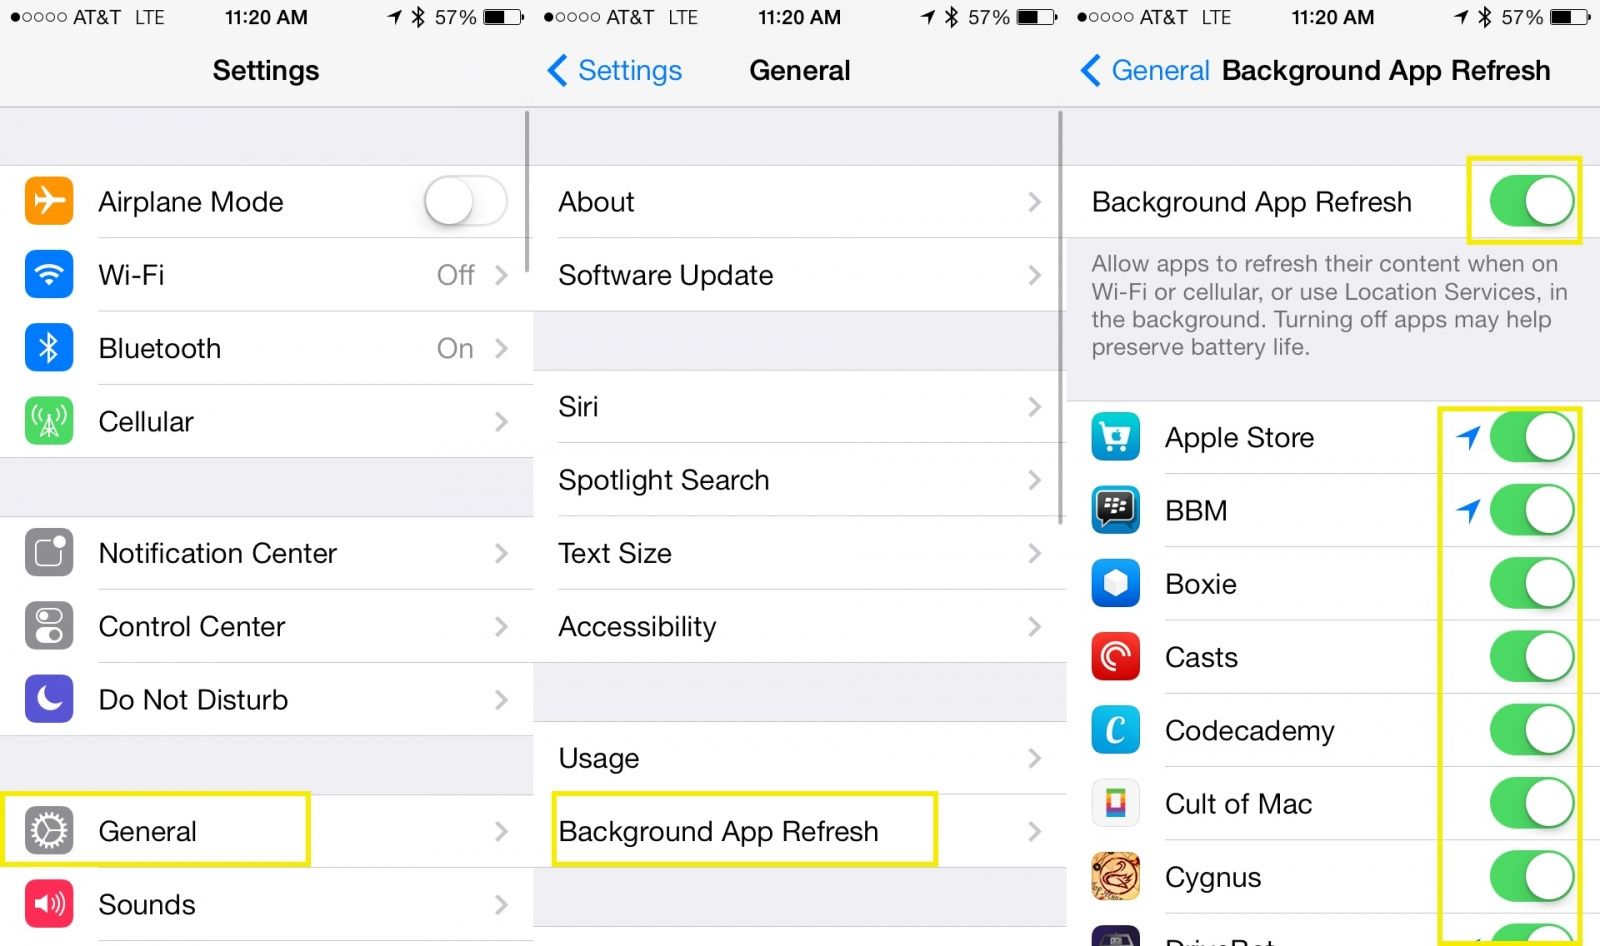 How To Save Some Battery Life With Background App Refresh IOS